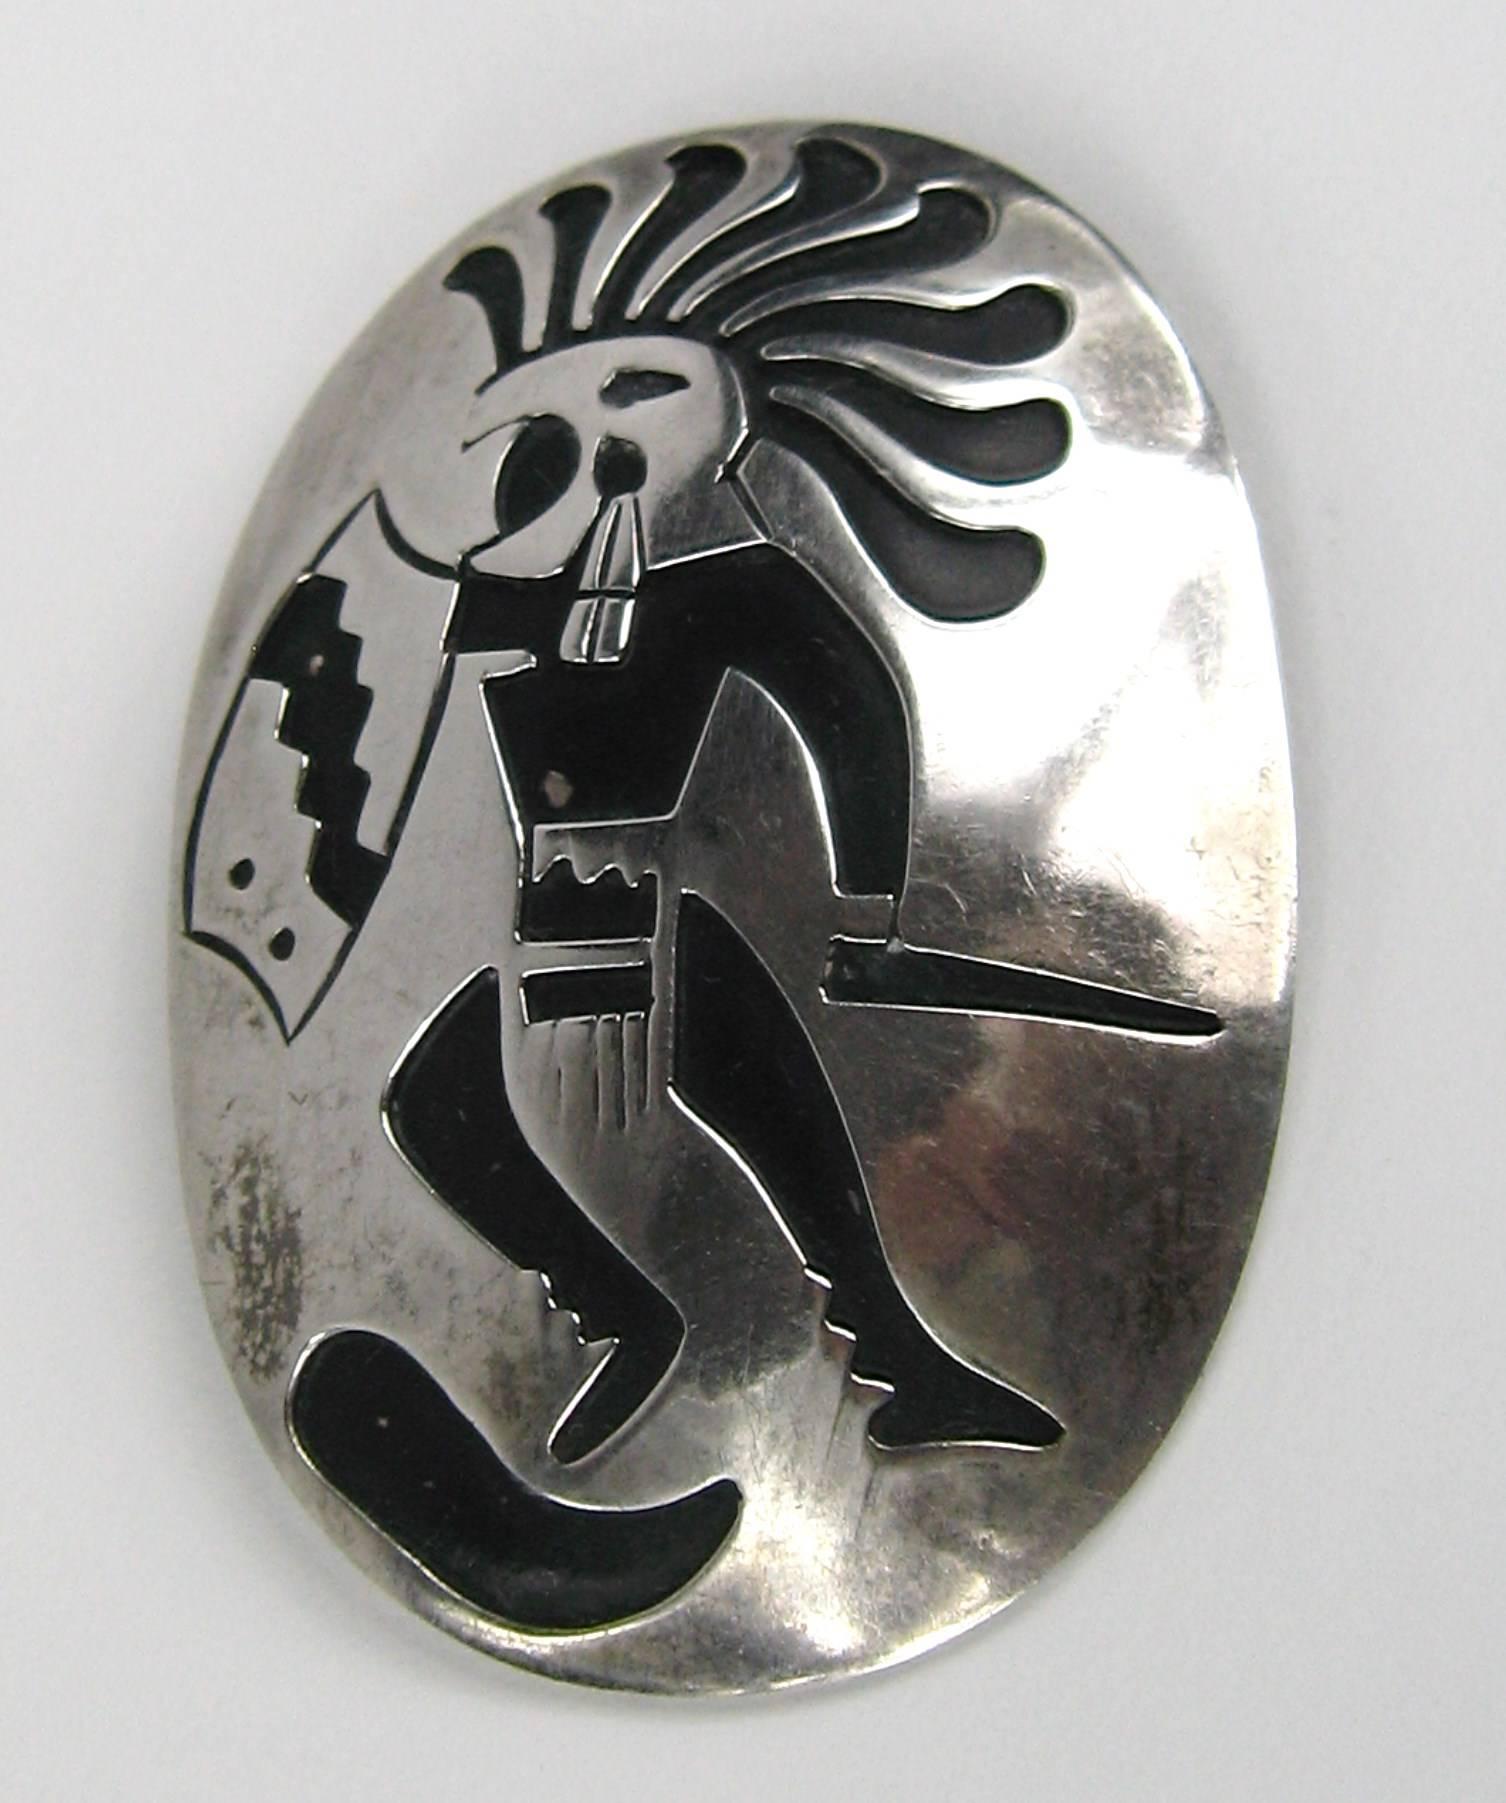 Large Taxco Sterling silver Mexican Hallmarked. This is Both a Pendant and Pin. Measuring 2.5 inches top to bottom x 1.75 inches wide. This is out of a massive collection of Contemporary designer clothing as well as Hopi, Zuni, Navajo, Southwestern,